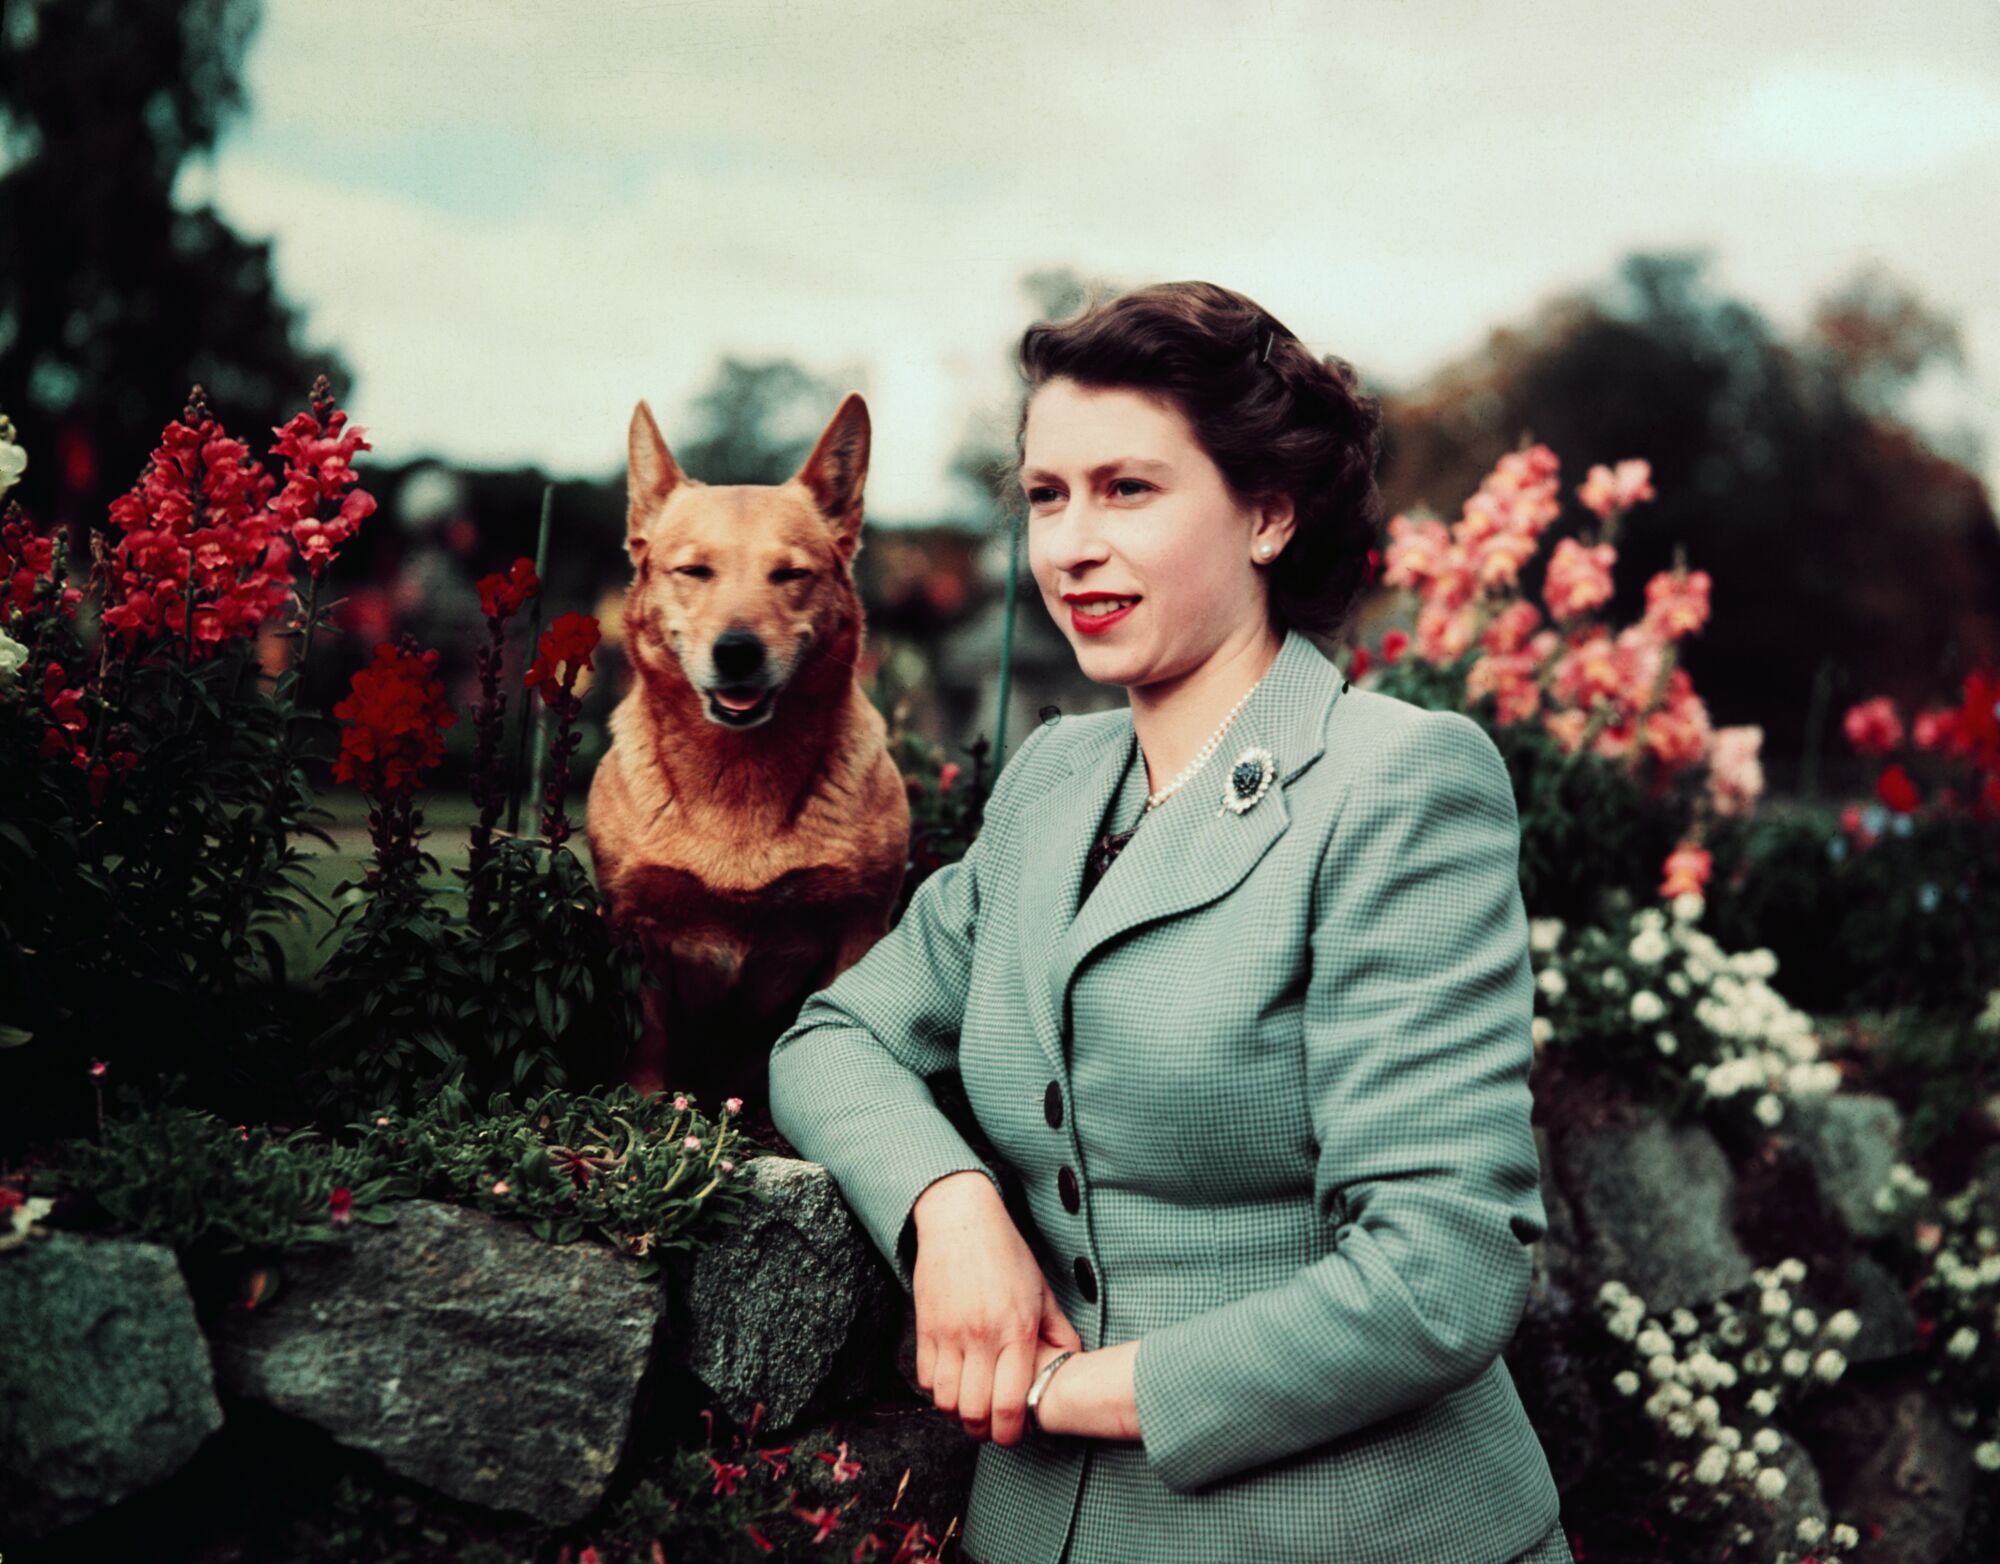 Queen Elizabeth II poses next to flowers with one of her beloved corgis in September 1952.